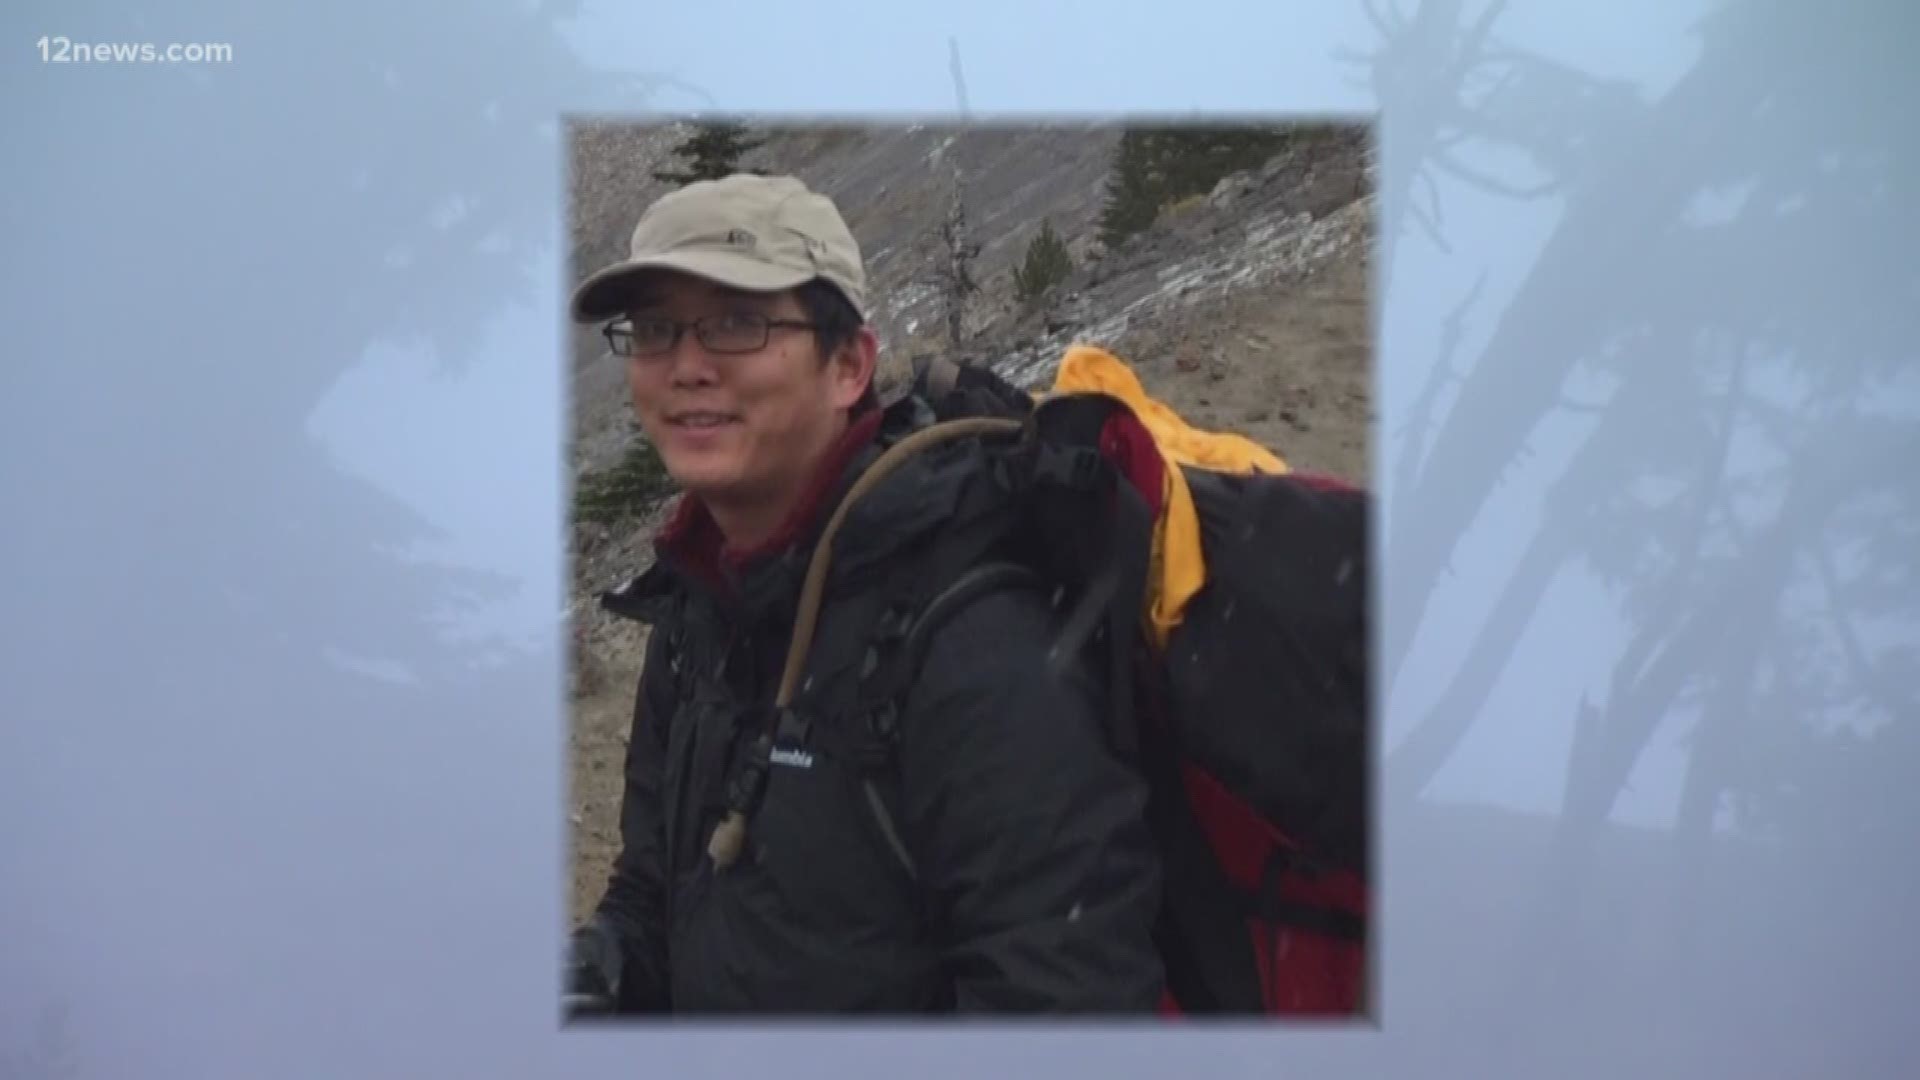 David Yagmourian, a graduate student at ASU, was hiking Mt. Hood with his friend when he went missing. Family and friends of David are hoping good weather means they will be able to find him soon.